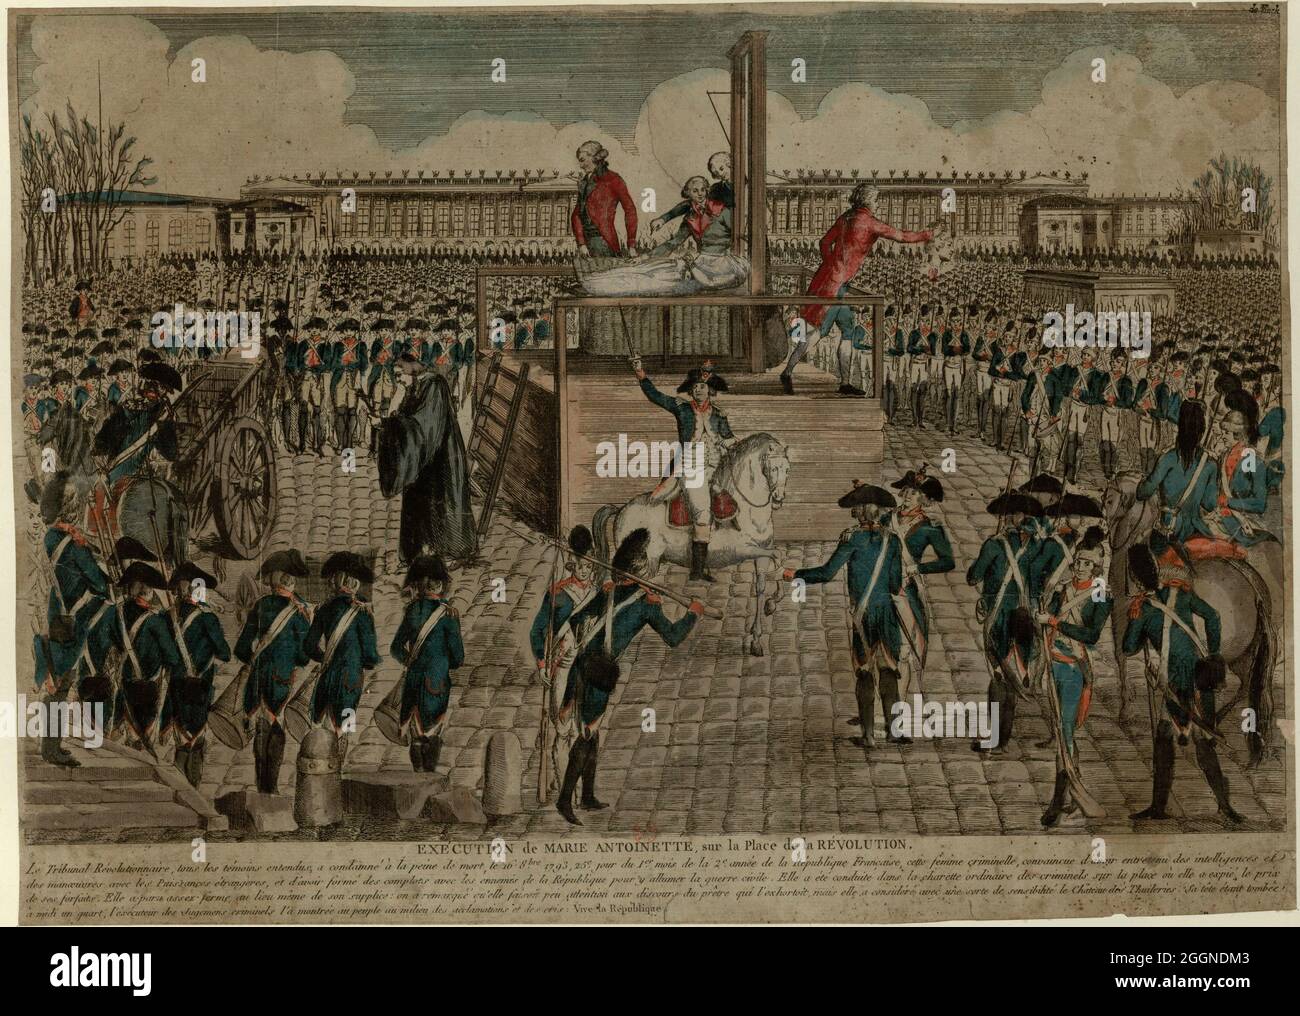 The Execution of Marie Antoinette on the Place de la Revolution on October 16, 1793. Museum: BIBLIOTHEQUE NATIONALE DE FRANCE. Author: ANONYMOUS. Stock Photo